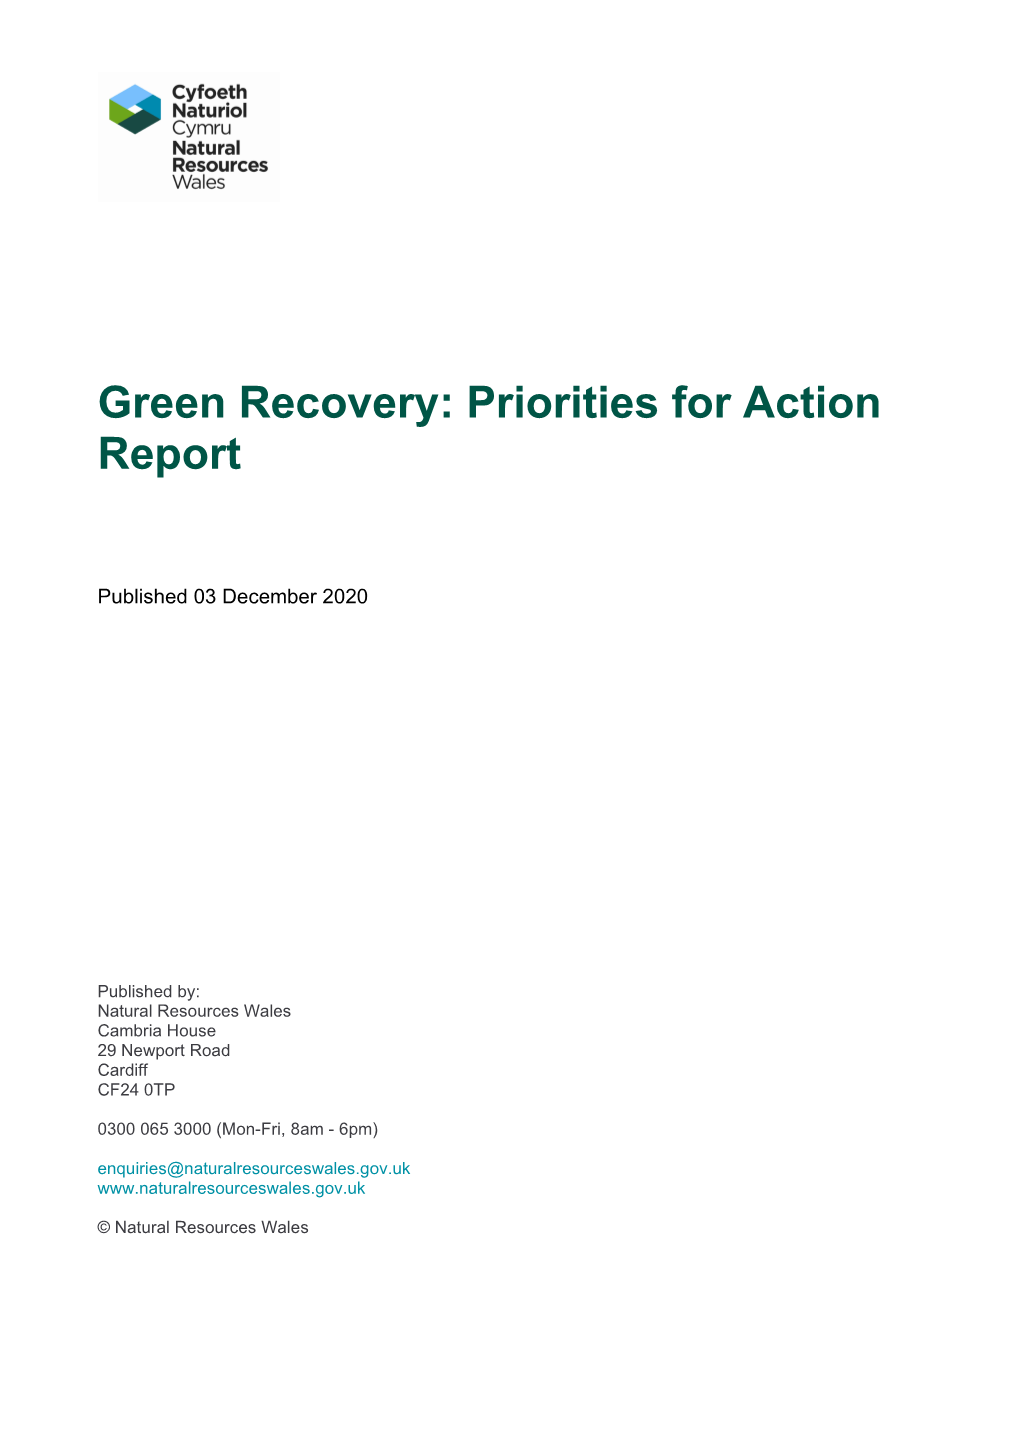 Green Recovery: Priorities for Action Report